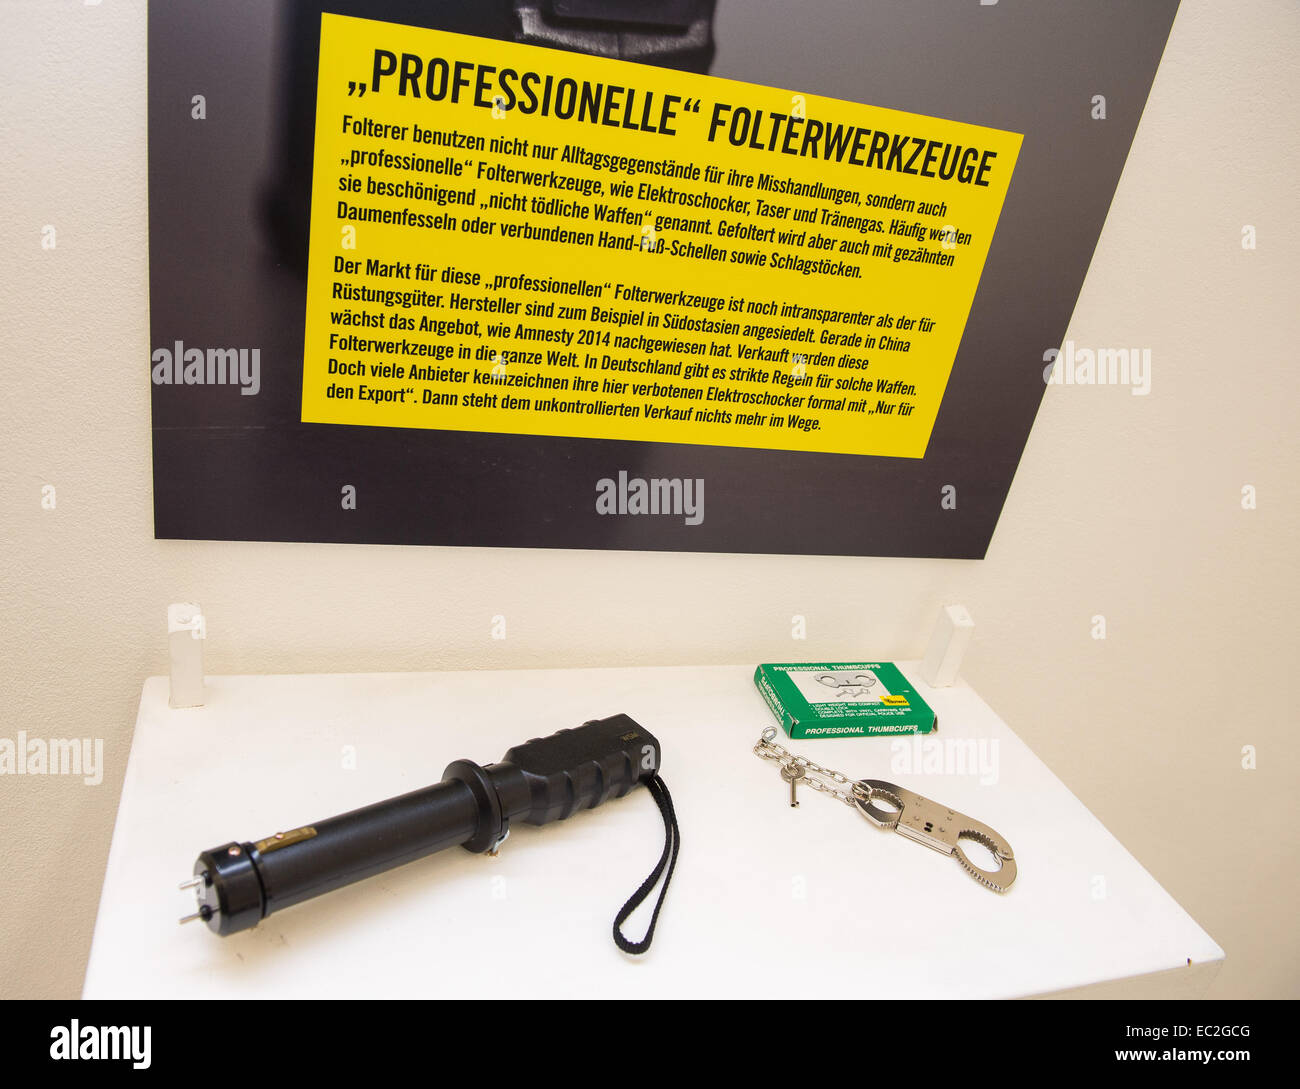 Berlin, Germany. 05th Dec, 2014. A taser (L) and thumbcuffs as professional torture instruments are seen at the exhibition 'Stop Folter' (lit. Stop torture) by Amnesty International in Berlin, Germany, 05 December 2014. The 'Stop Folter Shop' is open from 08 December 2014 until 17 December 2014. Photo: Lukas Schulze/dpa/Alamy Live News Stock Photo